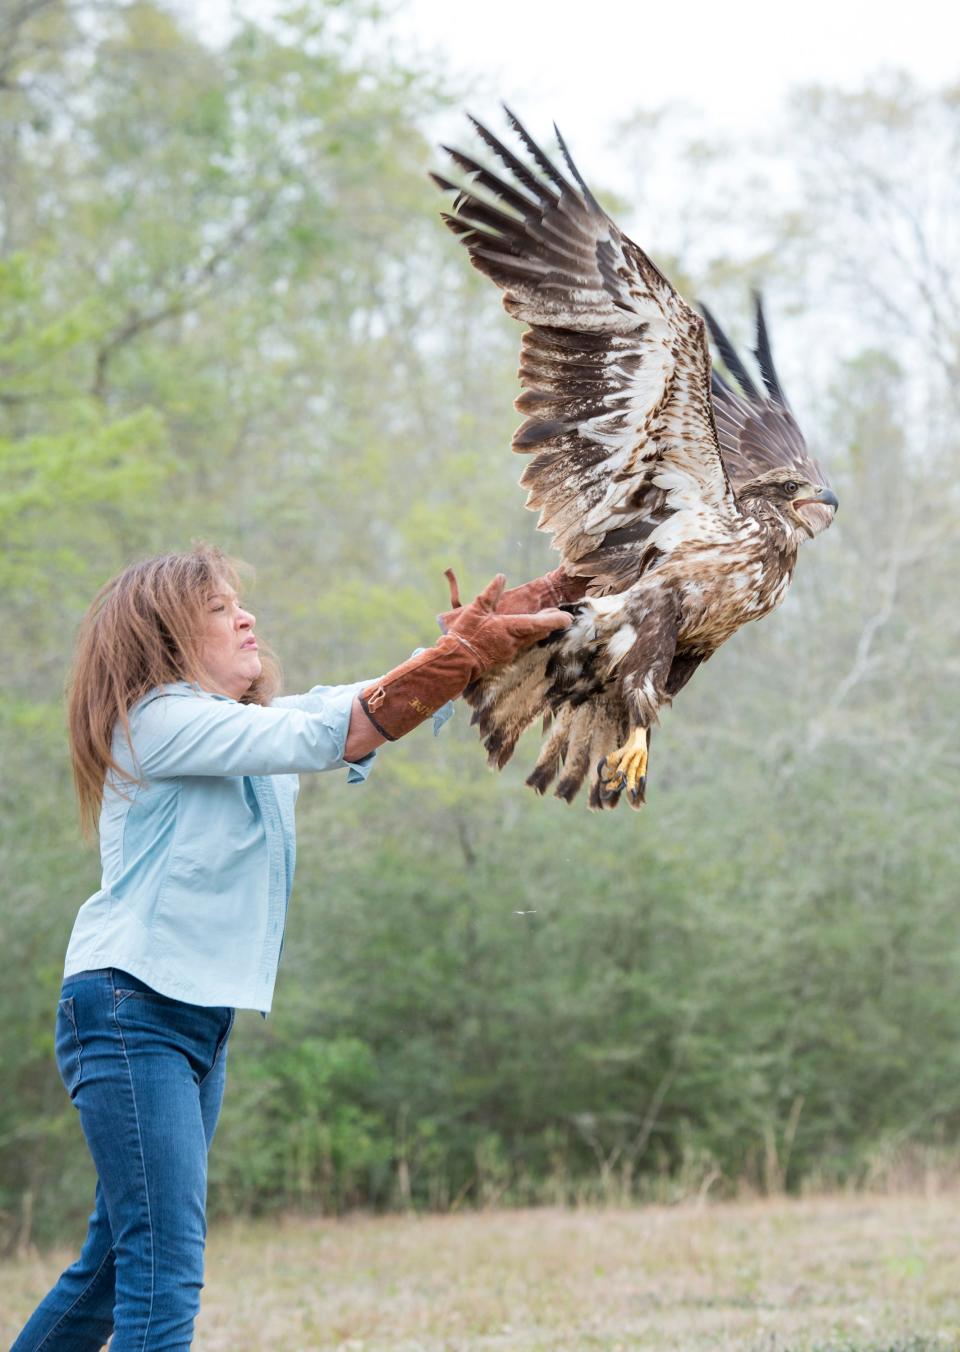 Dorothy Kaufmann, director of the Wildlife Sanctuary of Northwest Florida, releases 2-year-old Bald Eagle named "Mardi Gras" back into the wild in the woods of Milton on Friday, March 24, 2017. The bird was nursed back to health after being found ill at the Santa Rosa County central landfill during Mardi Gras on Feb. 23. According to Dorothy Kaufmann, director of the Wildlife Sanctuary of Northwest Florida, bald eagles don't get their distinctive white head and tail until they are approximately 5 years old.